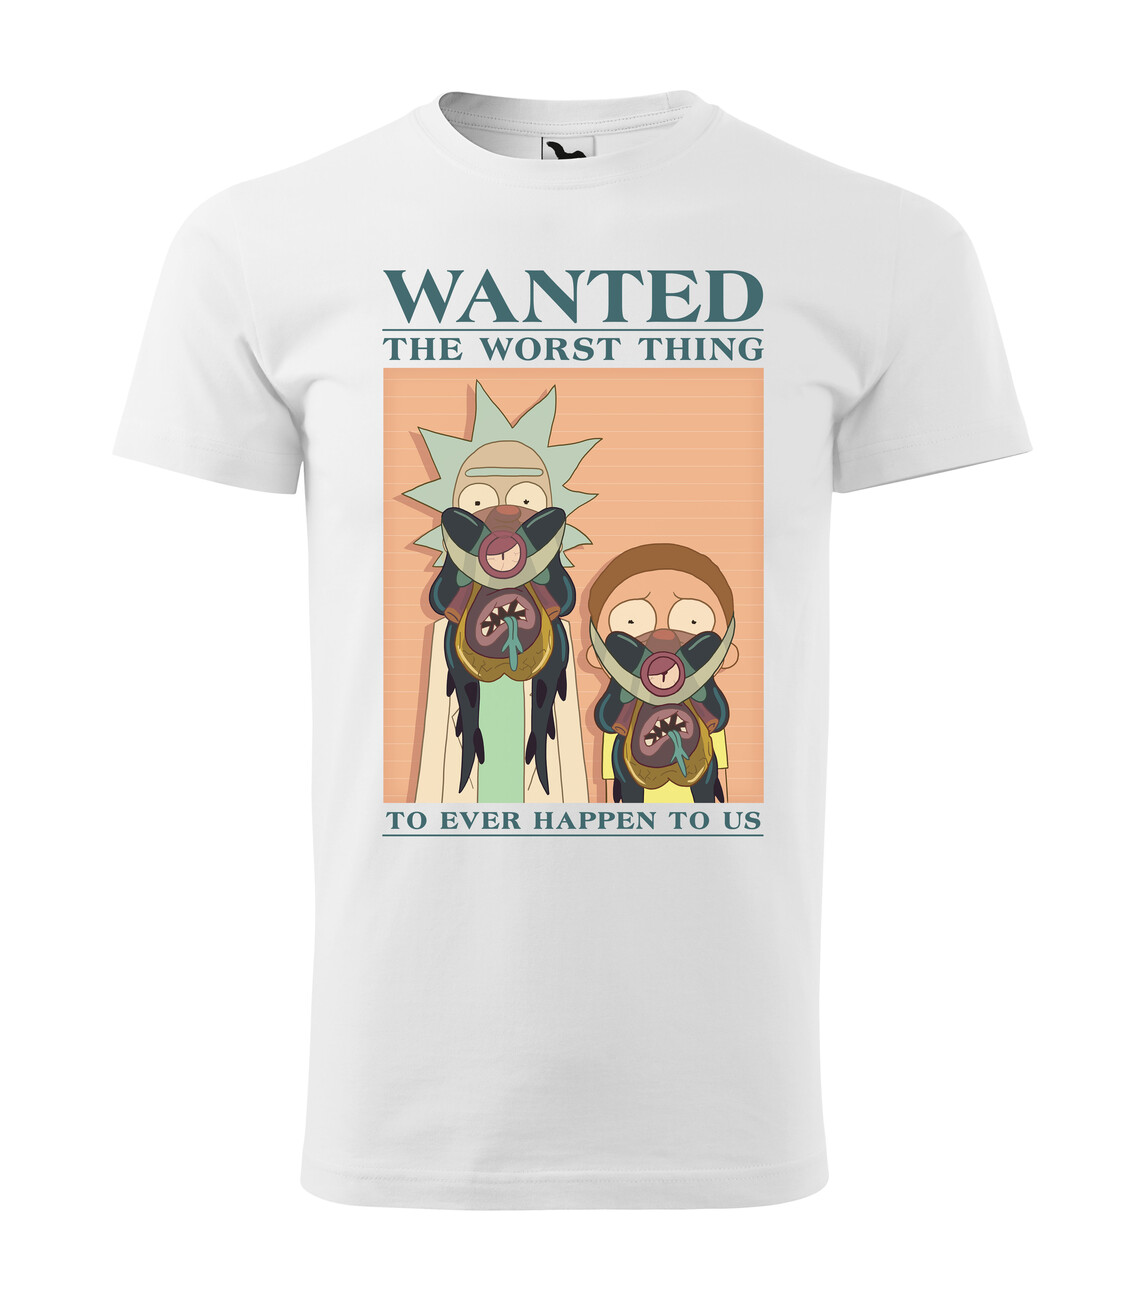 Rick and Morty Wanted | Clothes and accessories for merchandise fans